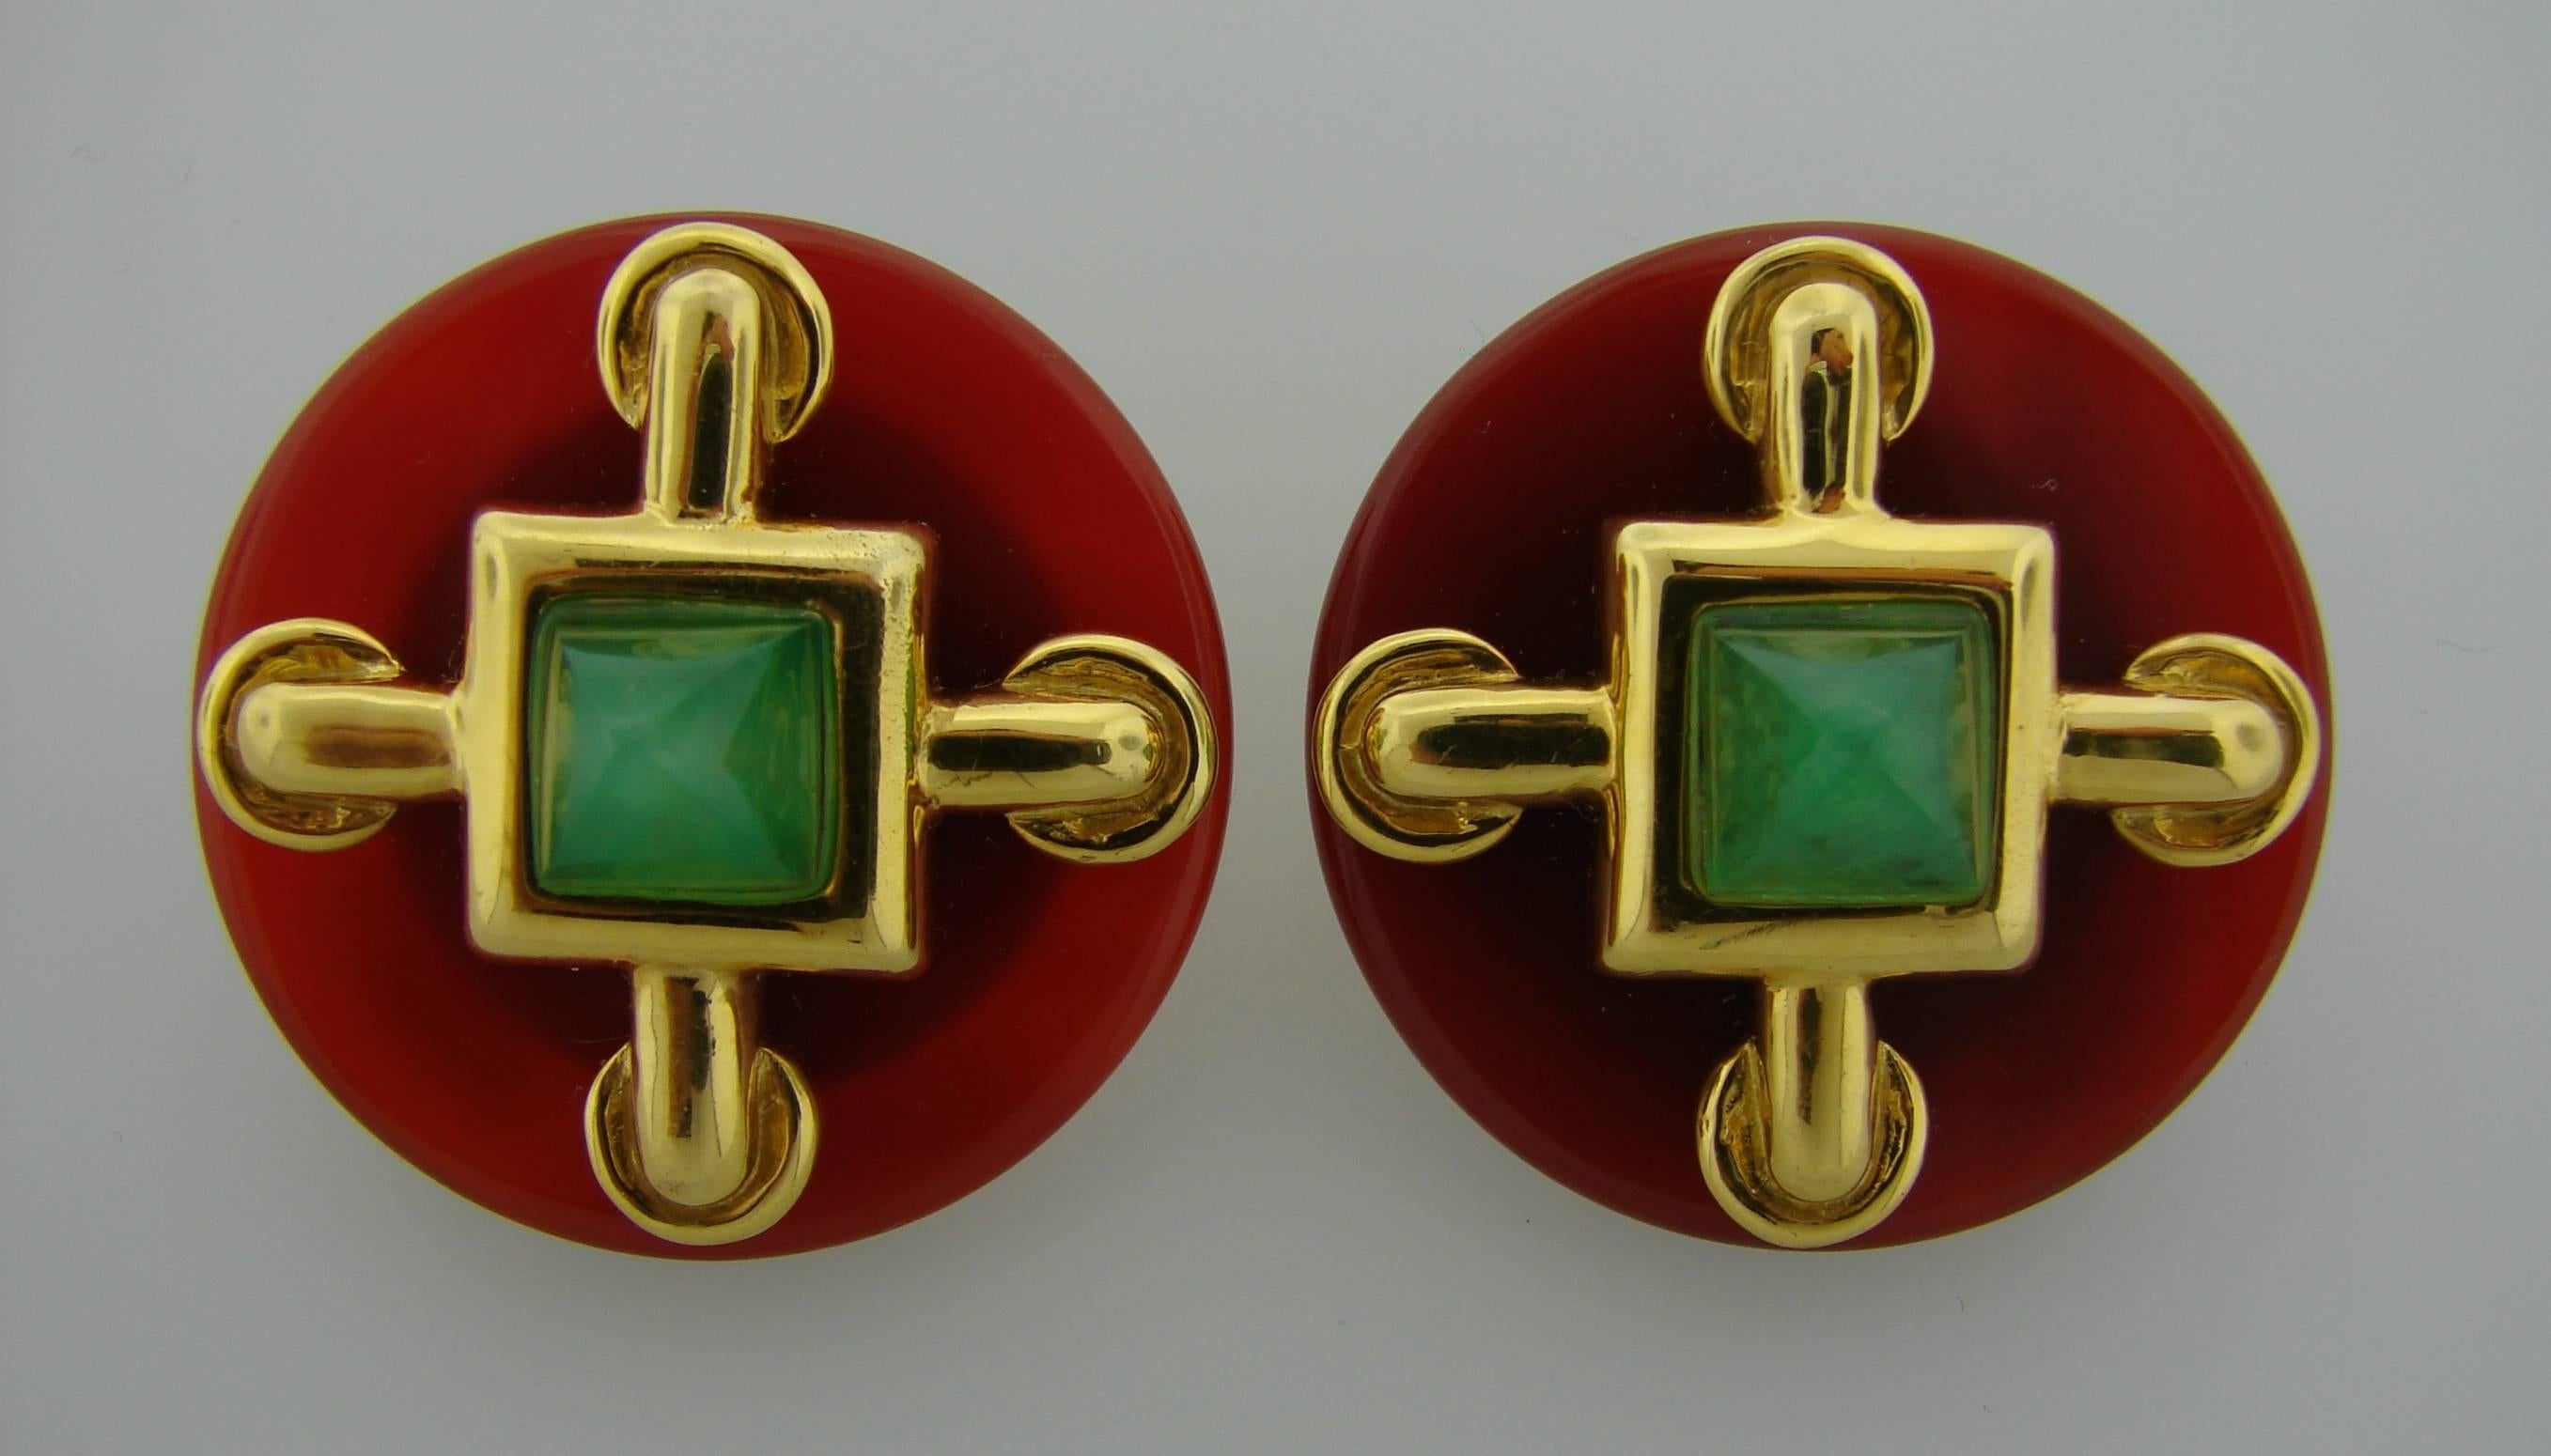 Signature earrings designed by Aldo Cipullo for Cartier in 1974. Colorful, bold yet elegant and wearable, the earrings are a great addition to your jewelry collection.
They are made of 18 karat yellow gold, carnelian and chrysophrase. 
The earrings